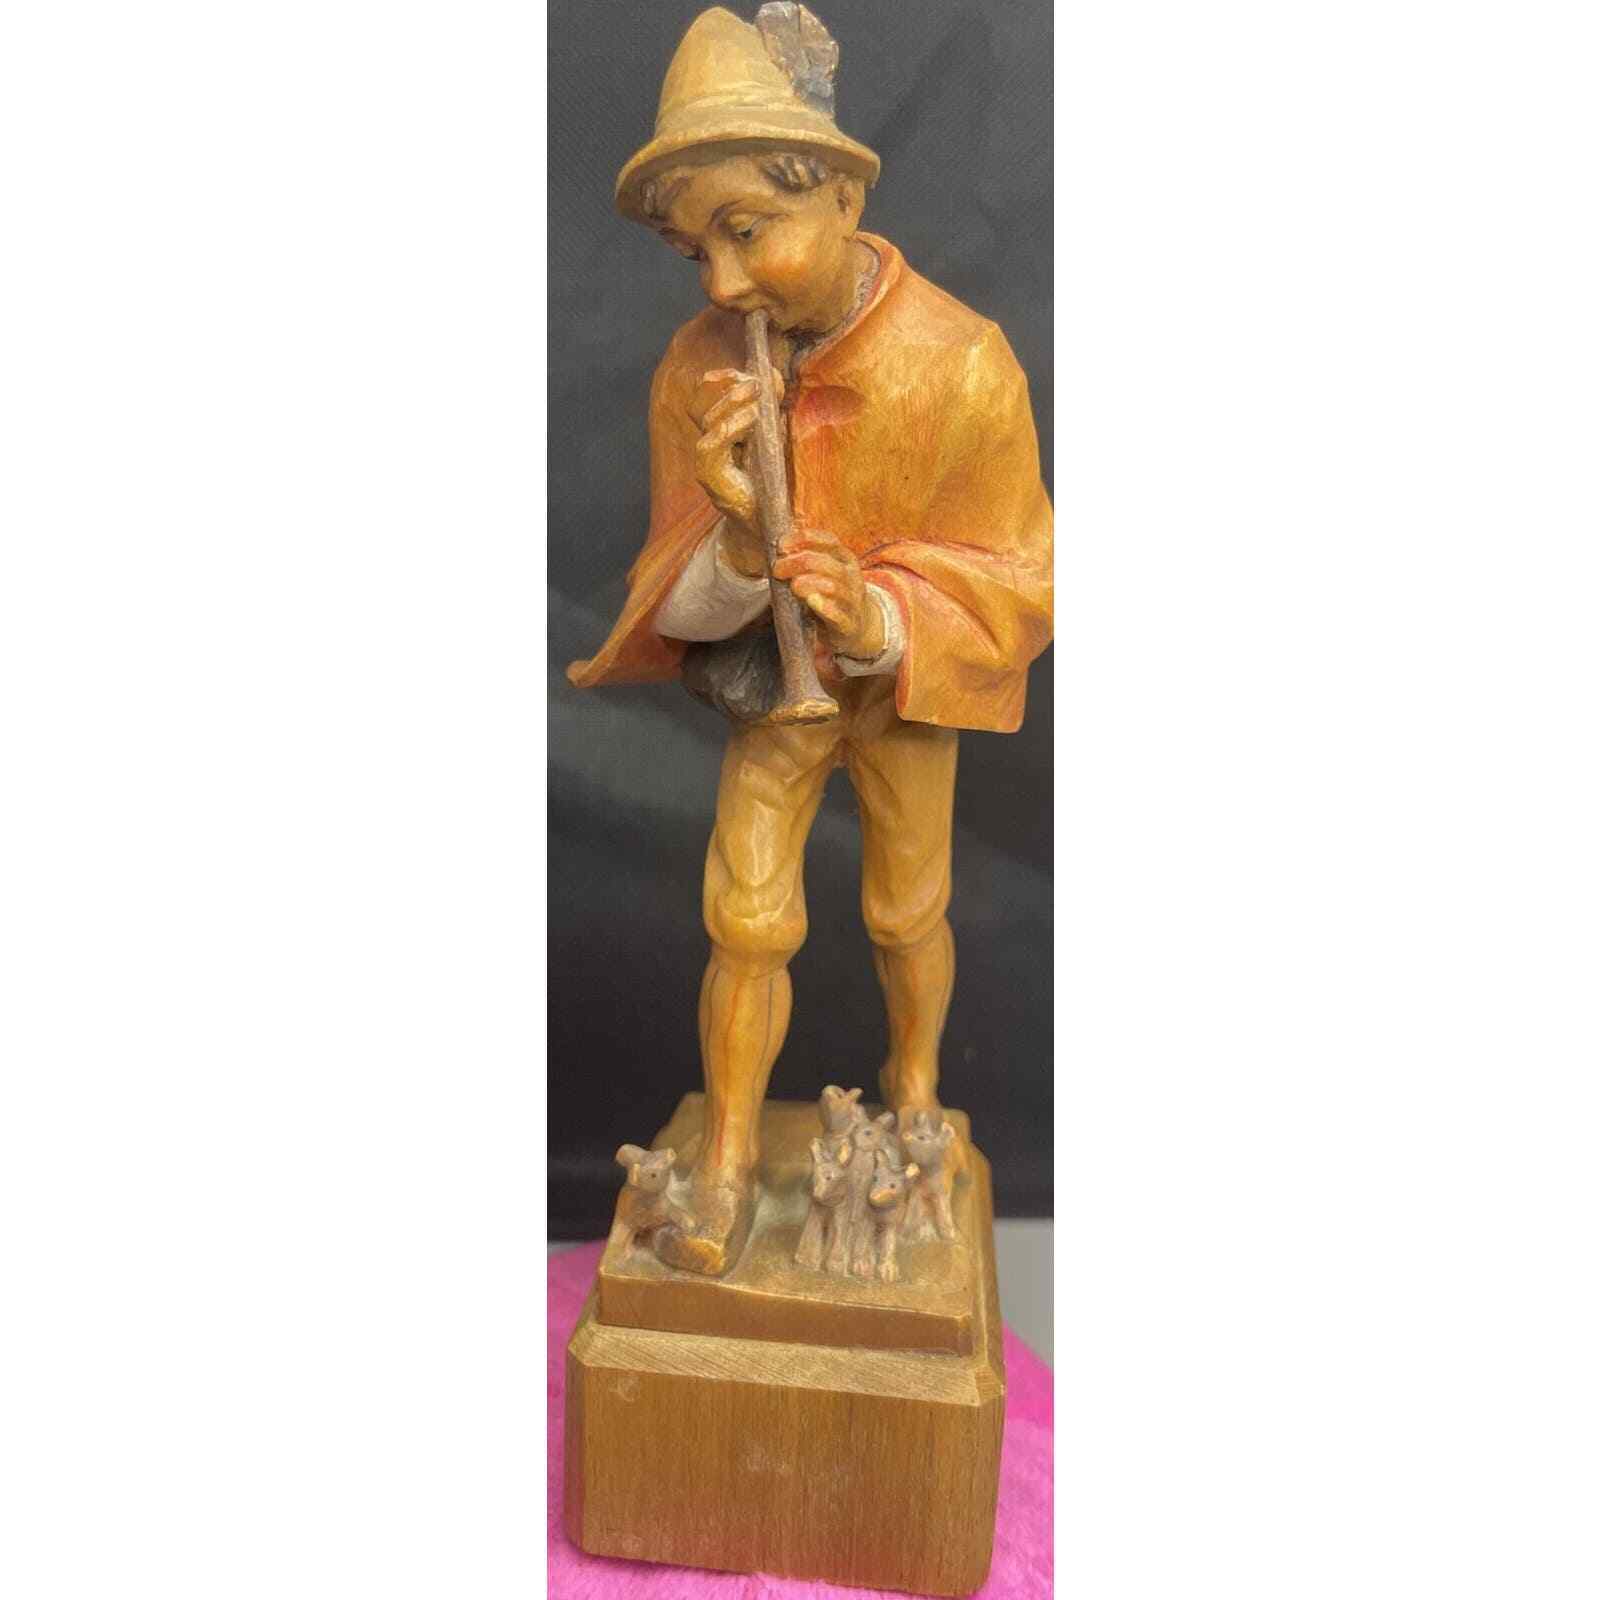 60’s ANRI HAND CARVED WOOD PIED PIPER OF HAMELIN FIGURINE SCULPTURE *Read* Flaws